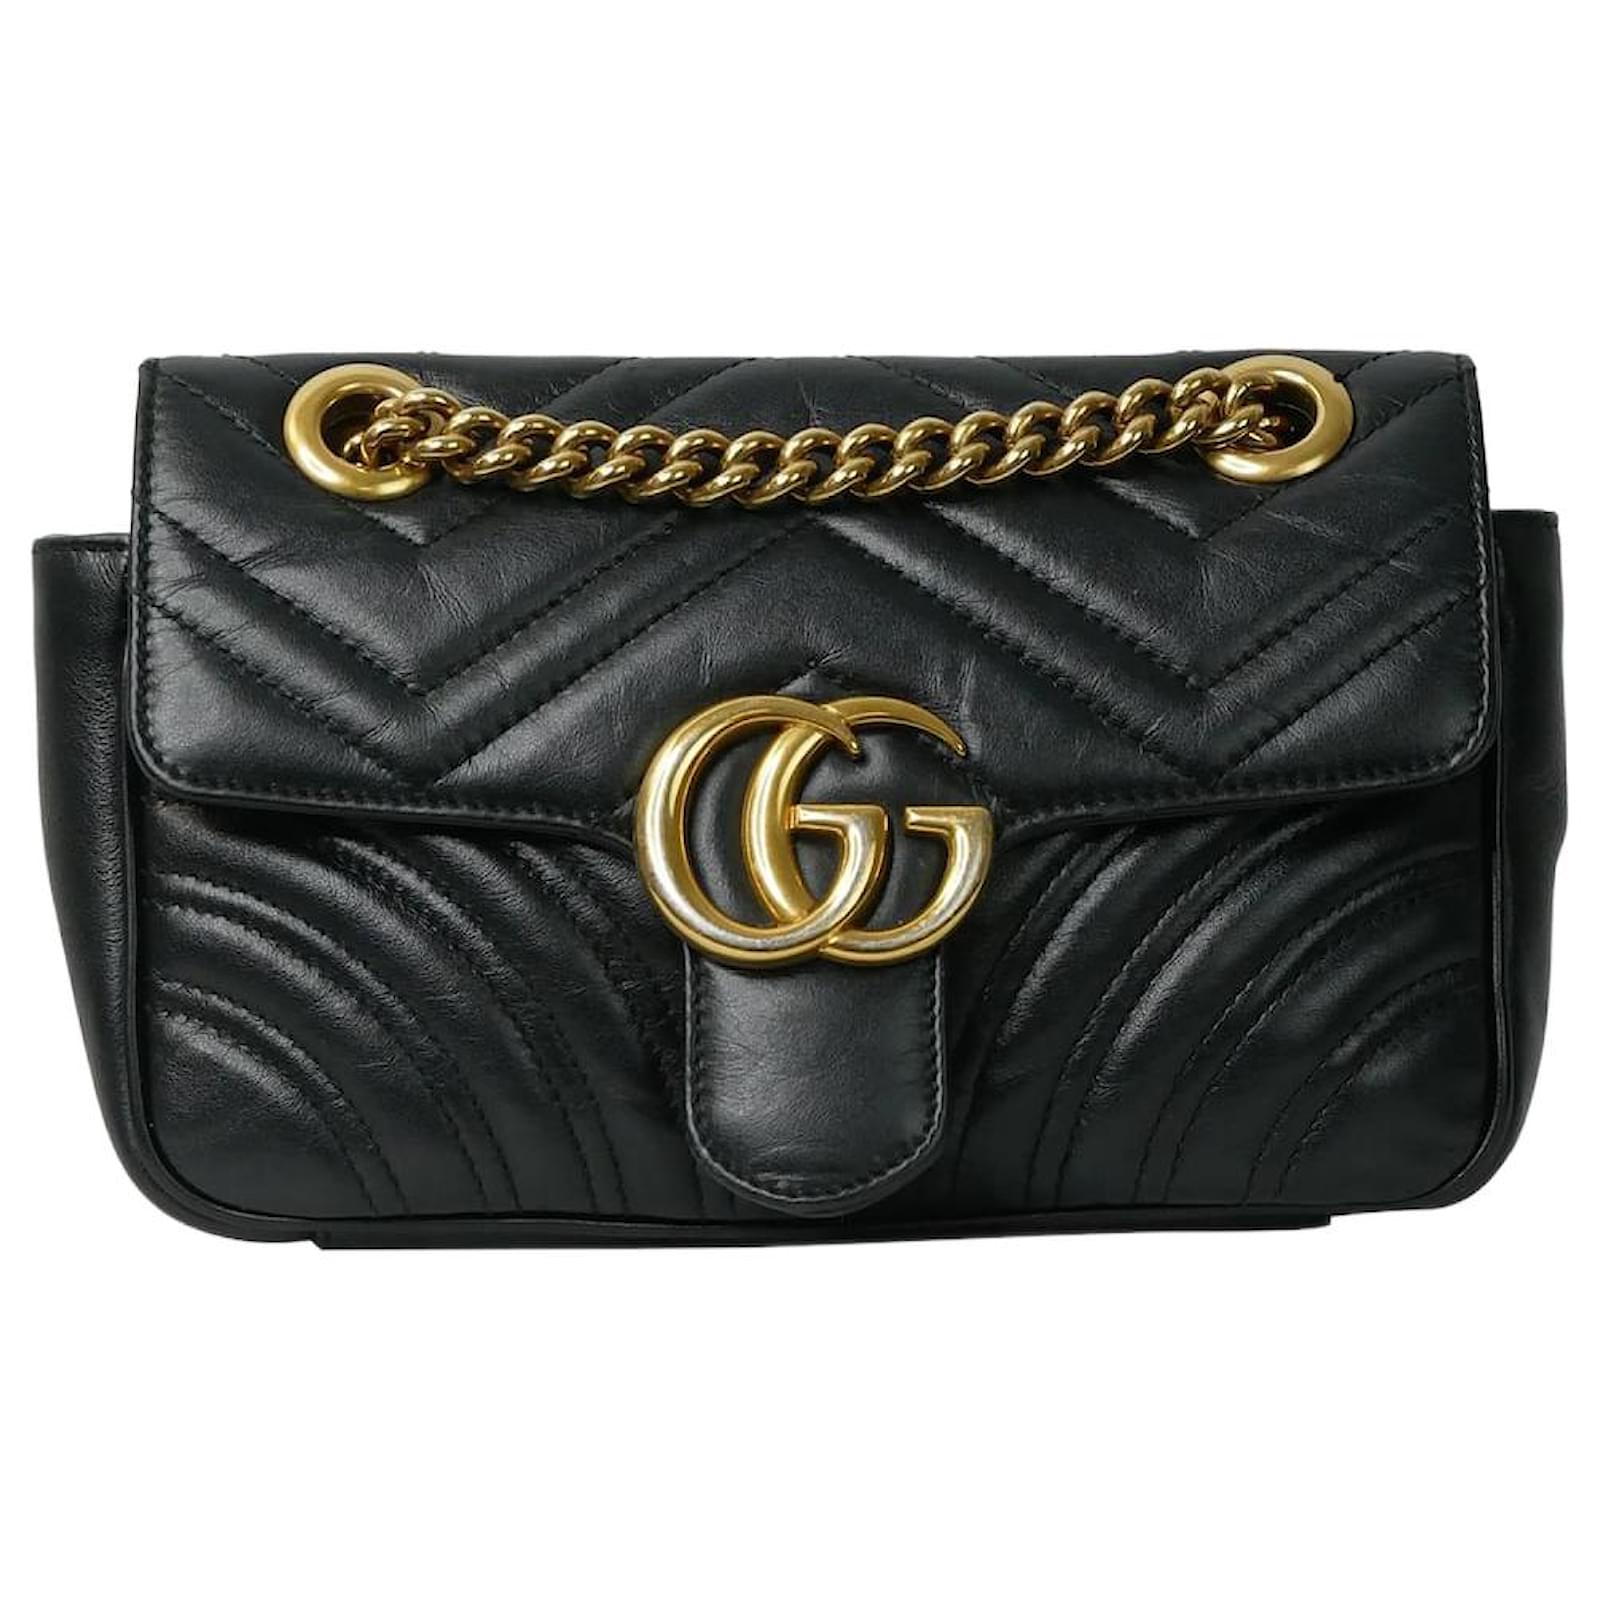 GG Marmont Leather Clutch in Black - Gucci